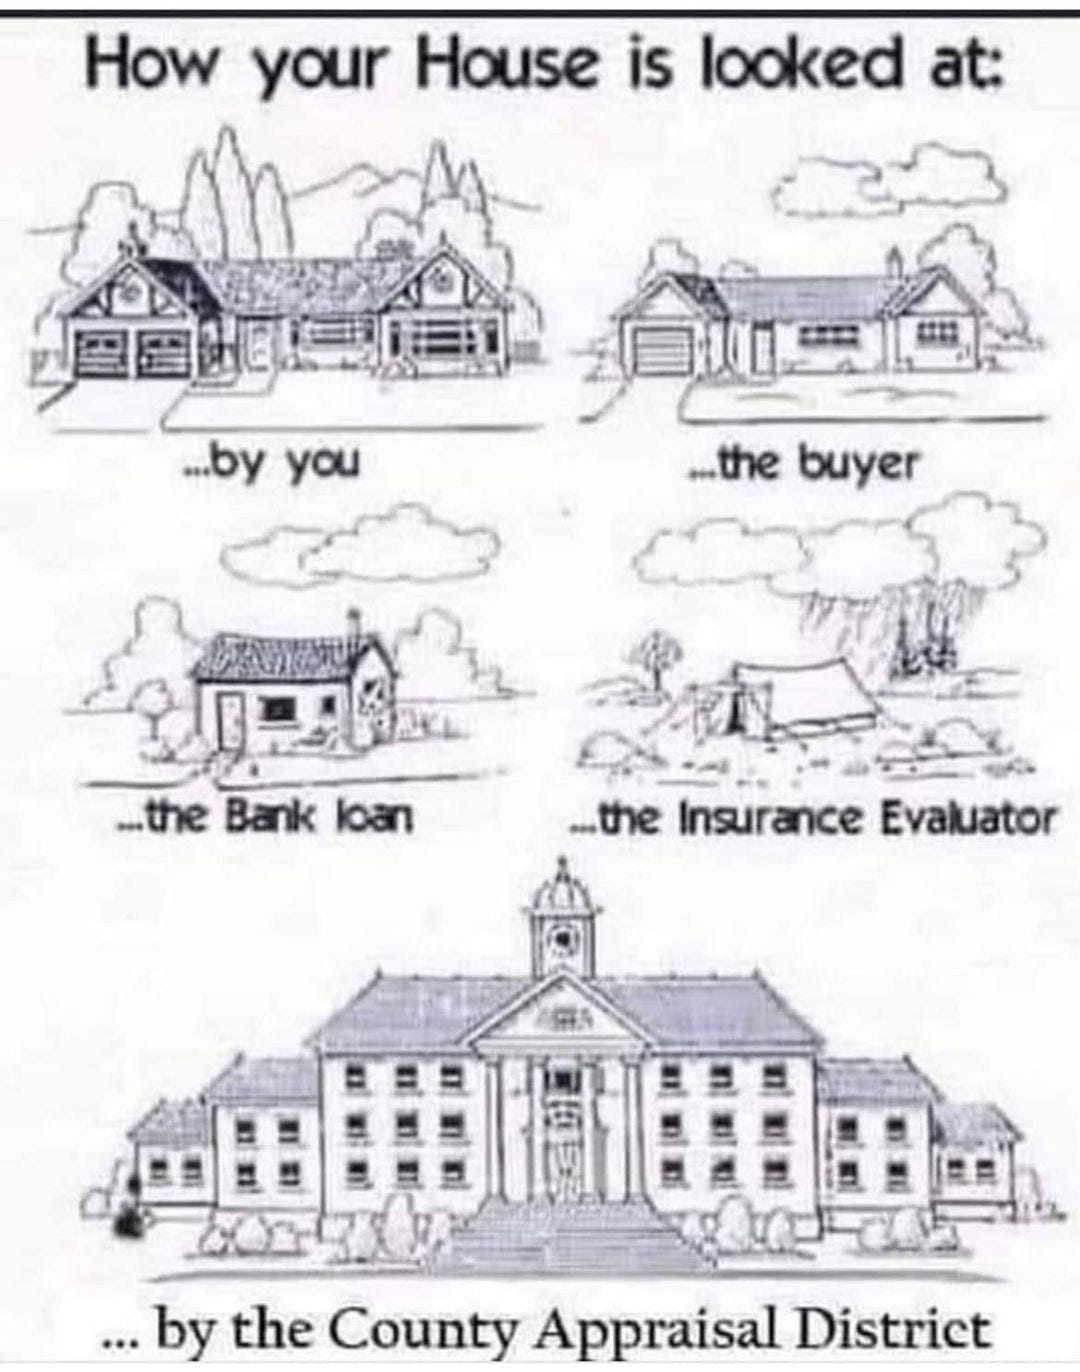 May be an image of text that says 'How your House is looked at: ...by you ...the buyer ...the Bank loan ...the Insurance Evaluator ...by the County Appraisal District'